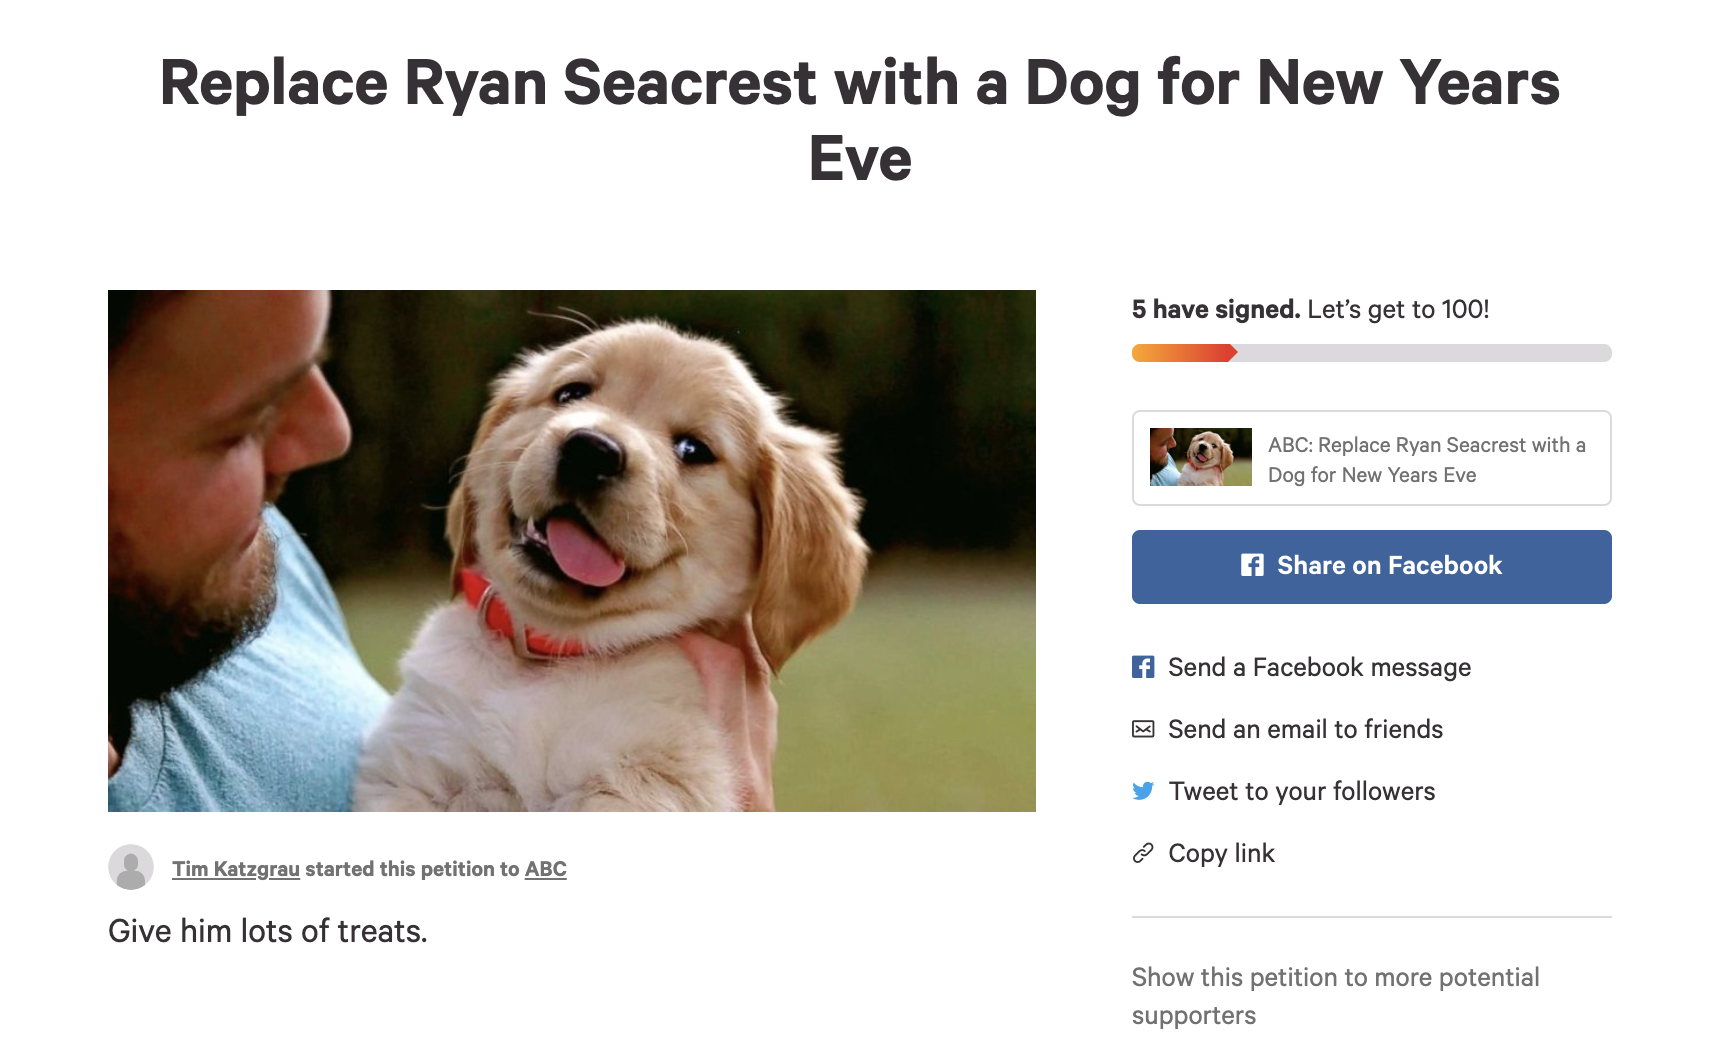 Petition to replace Ryan Seacrest with a dog for New Years Eve